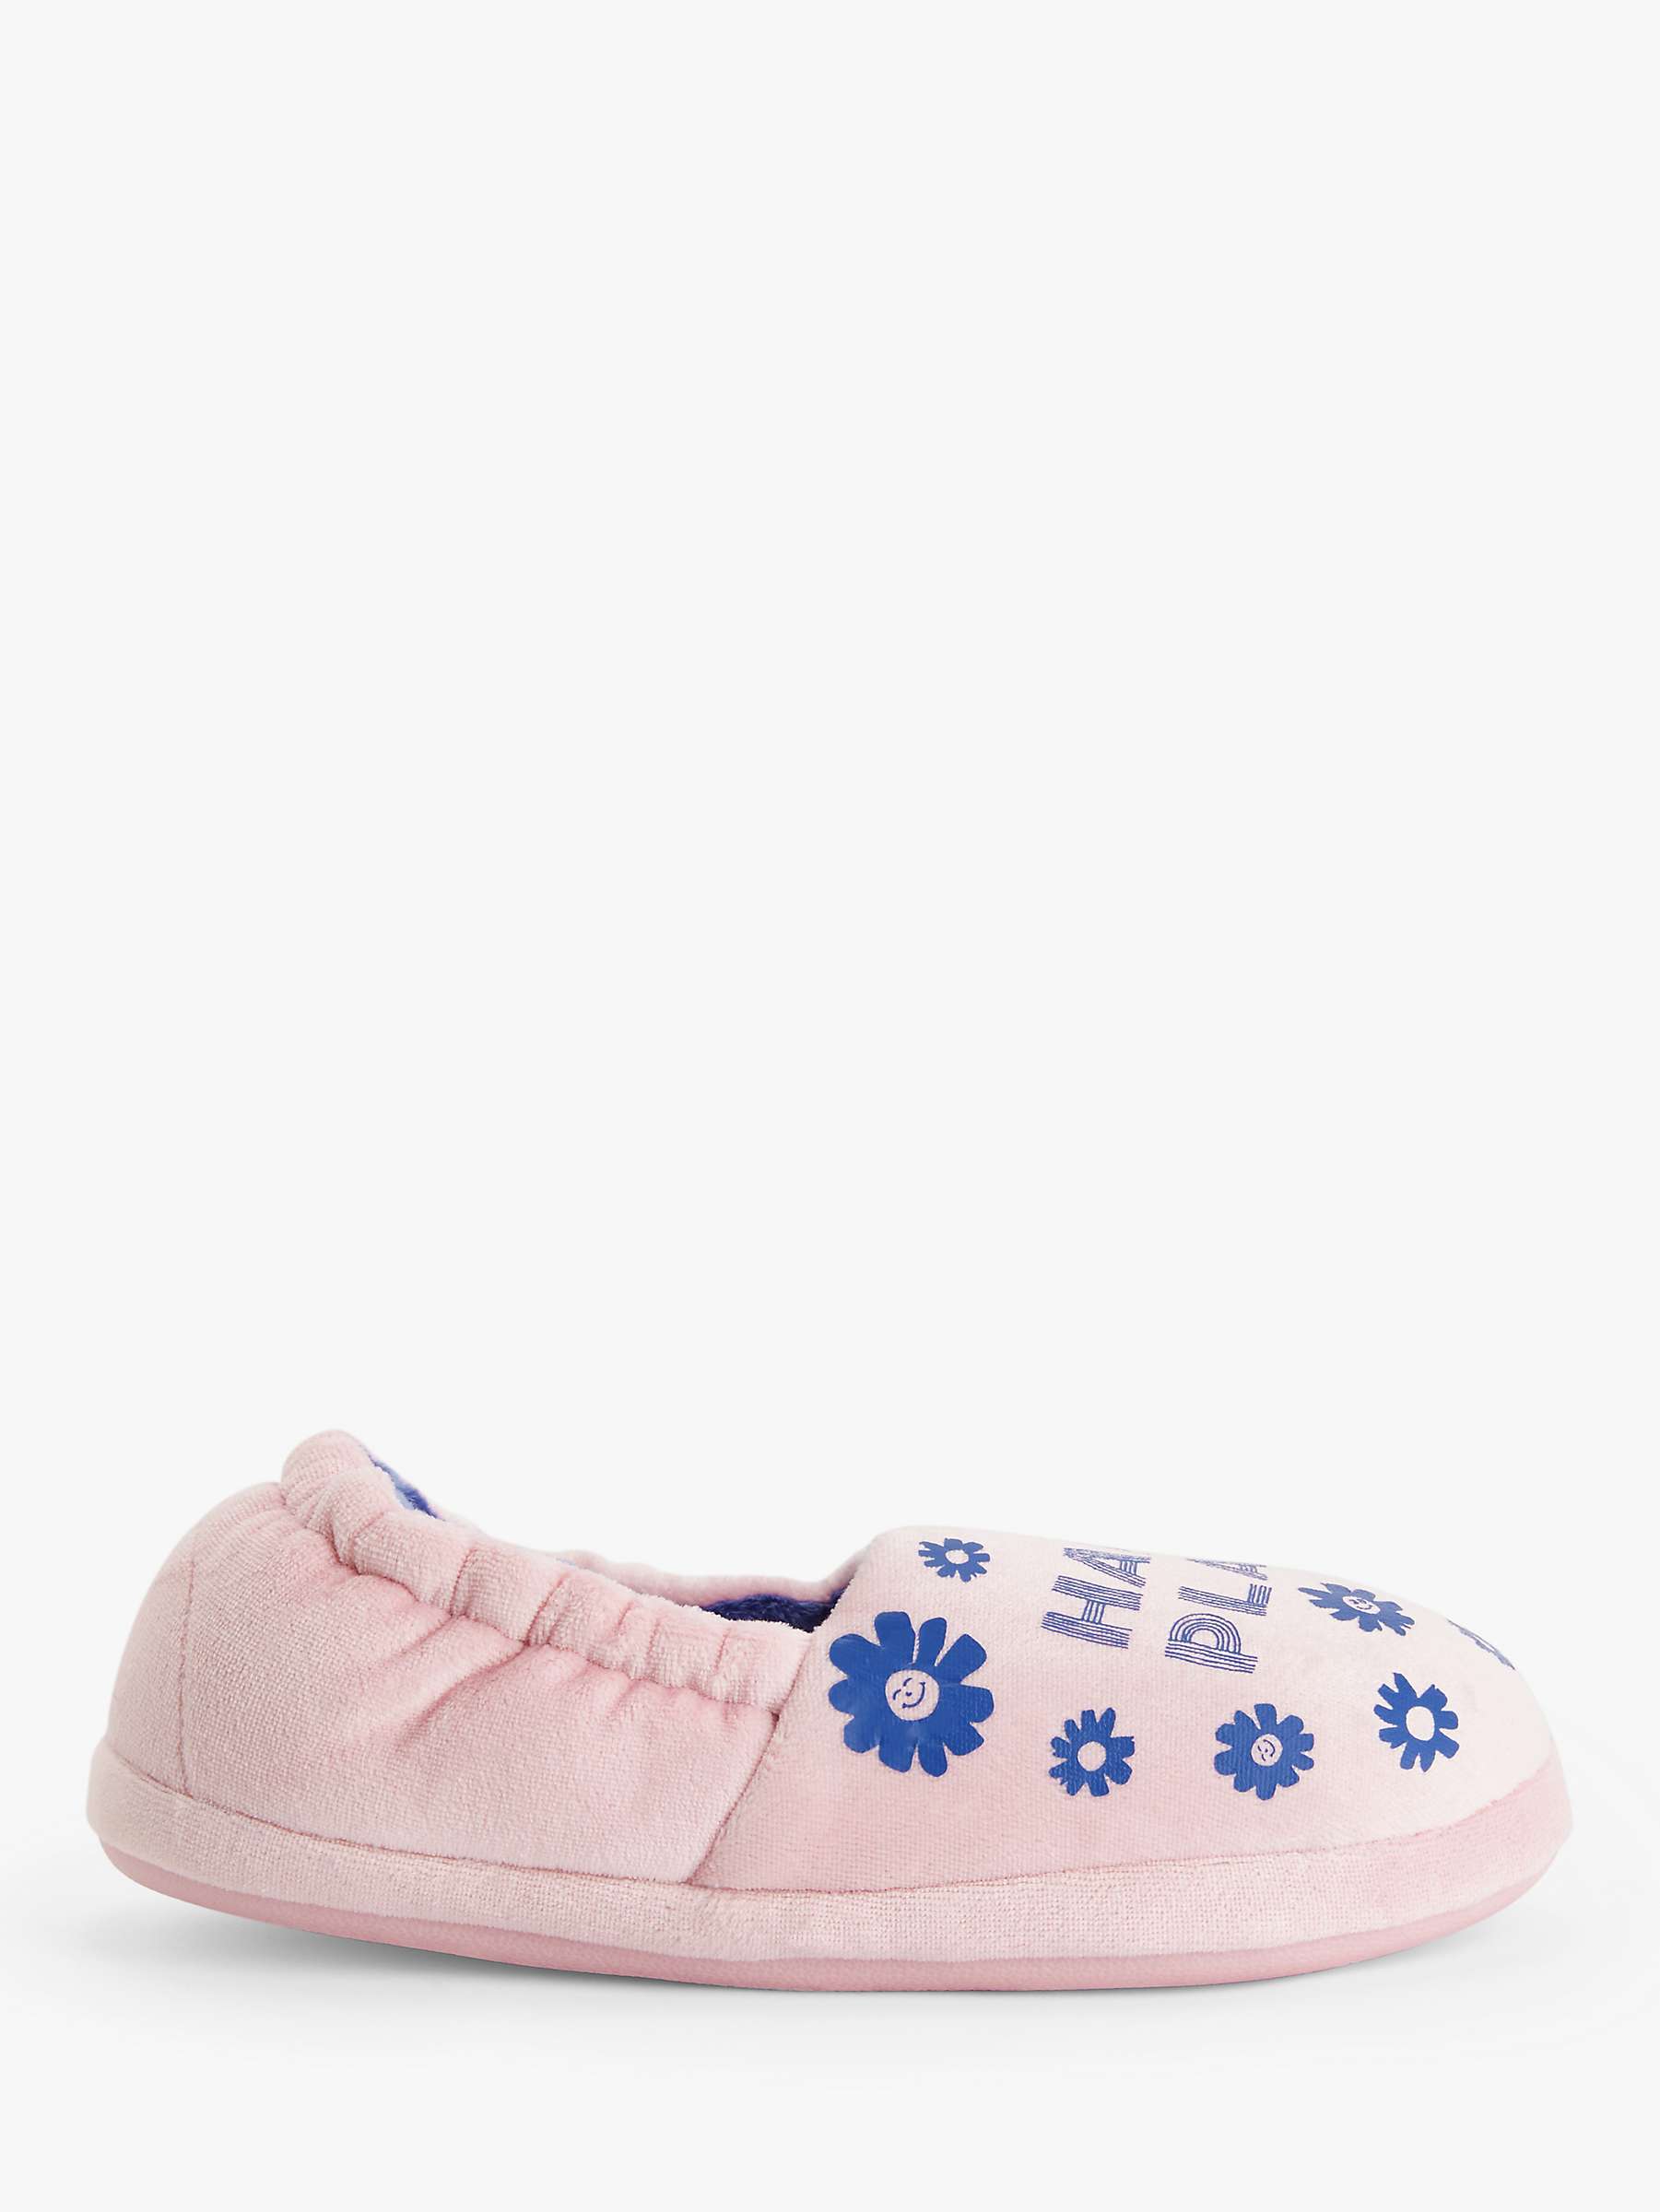 Buy John Lewis ANYDAY Kids' Happy Place Slippers Online at johnlewis.com